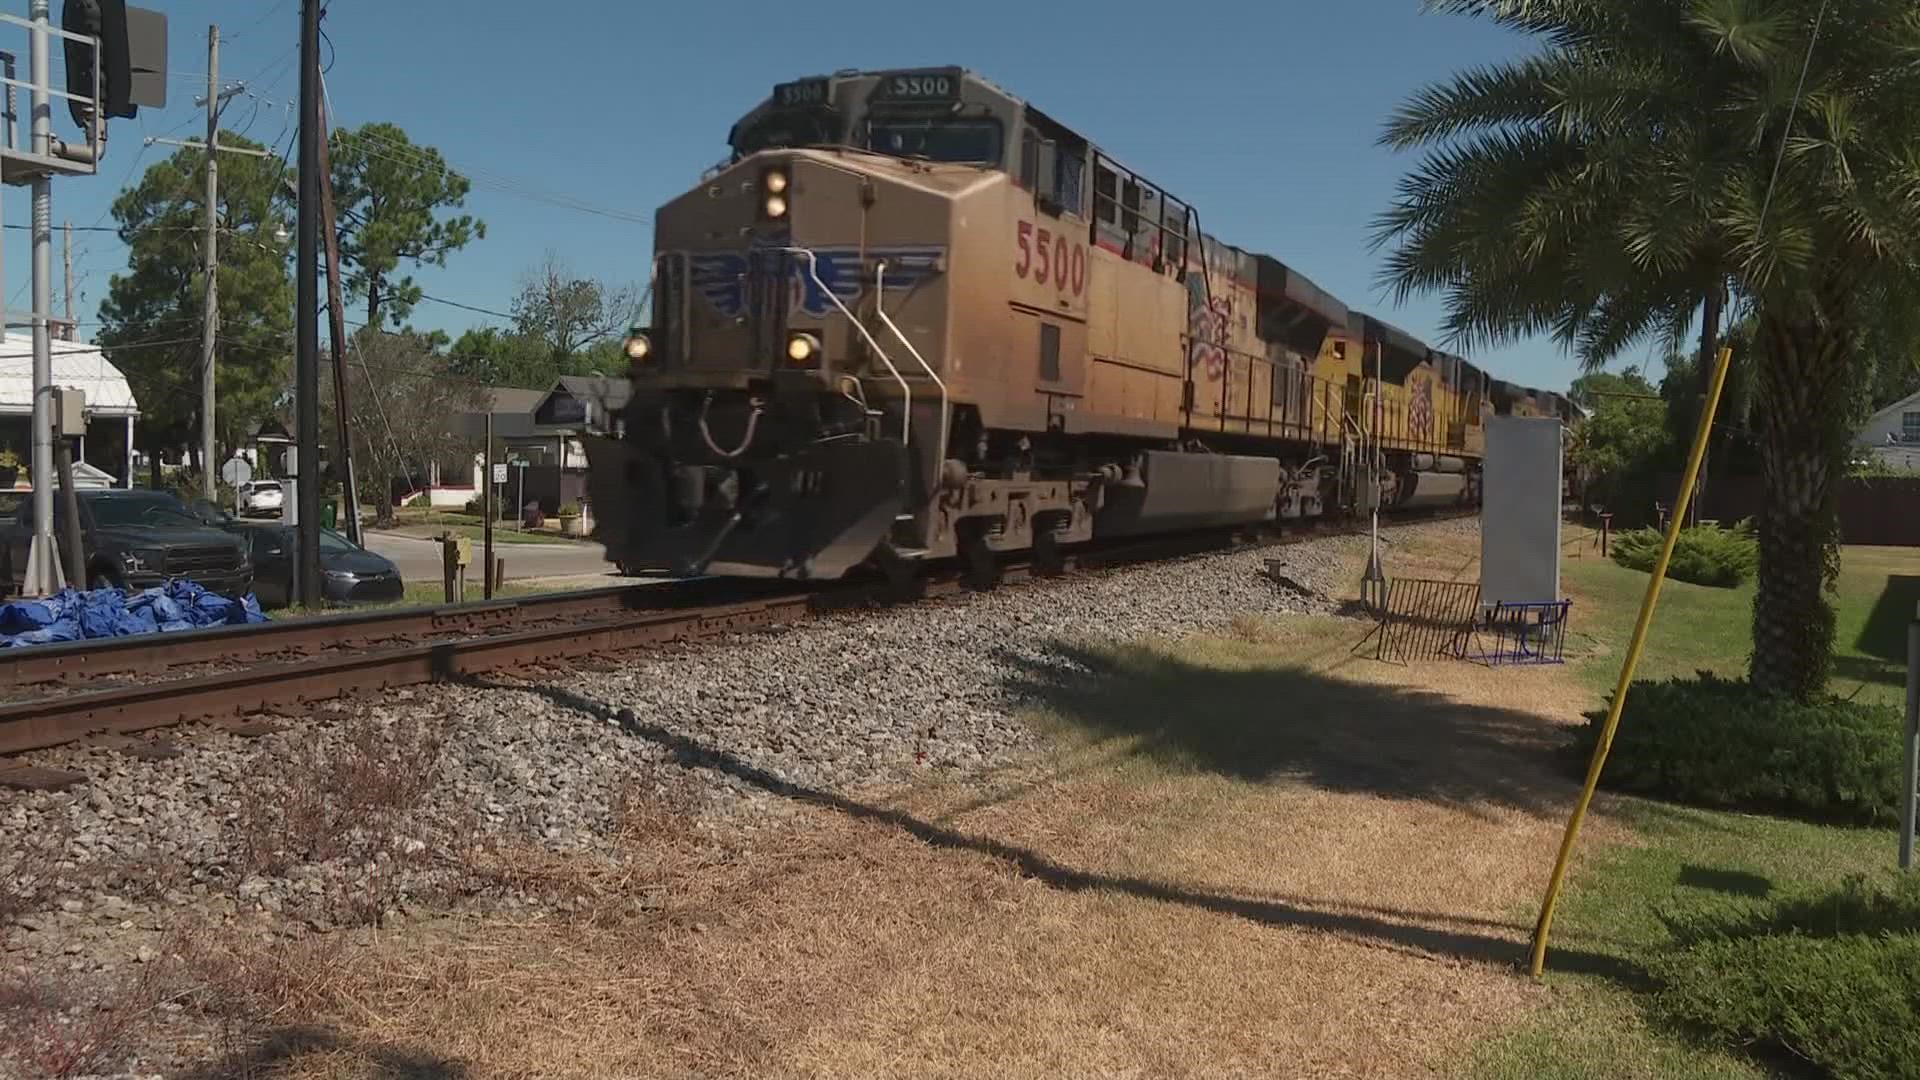 After a train was stopped on Metairie Road for three hours on Saturday, drivers and businesses are fed up. Paul Murphy tells us what the Parish can do.